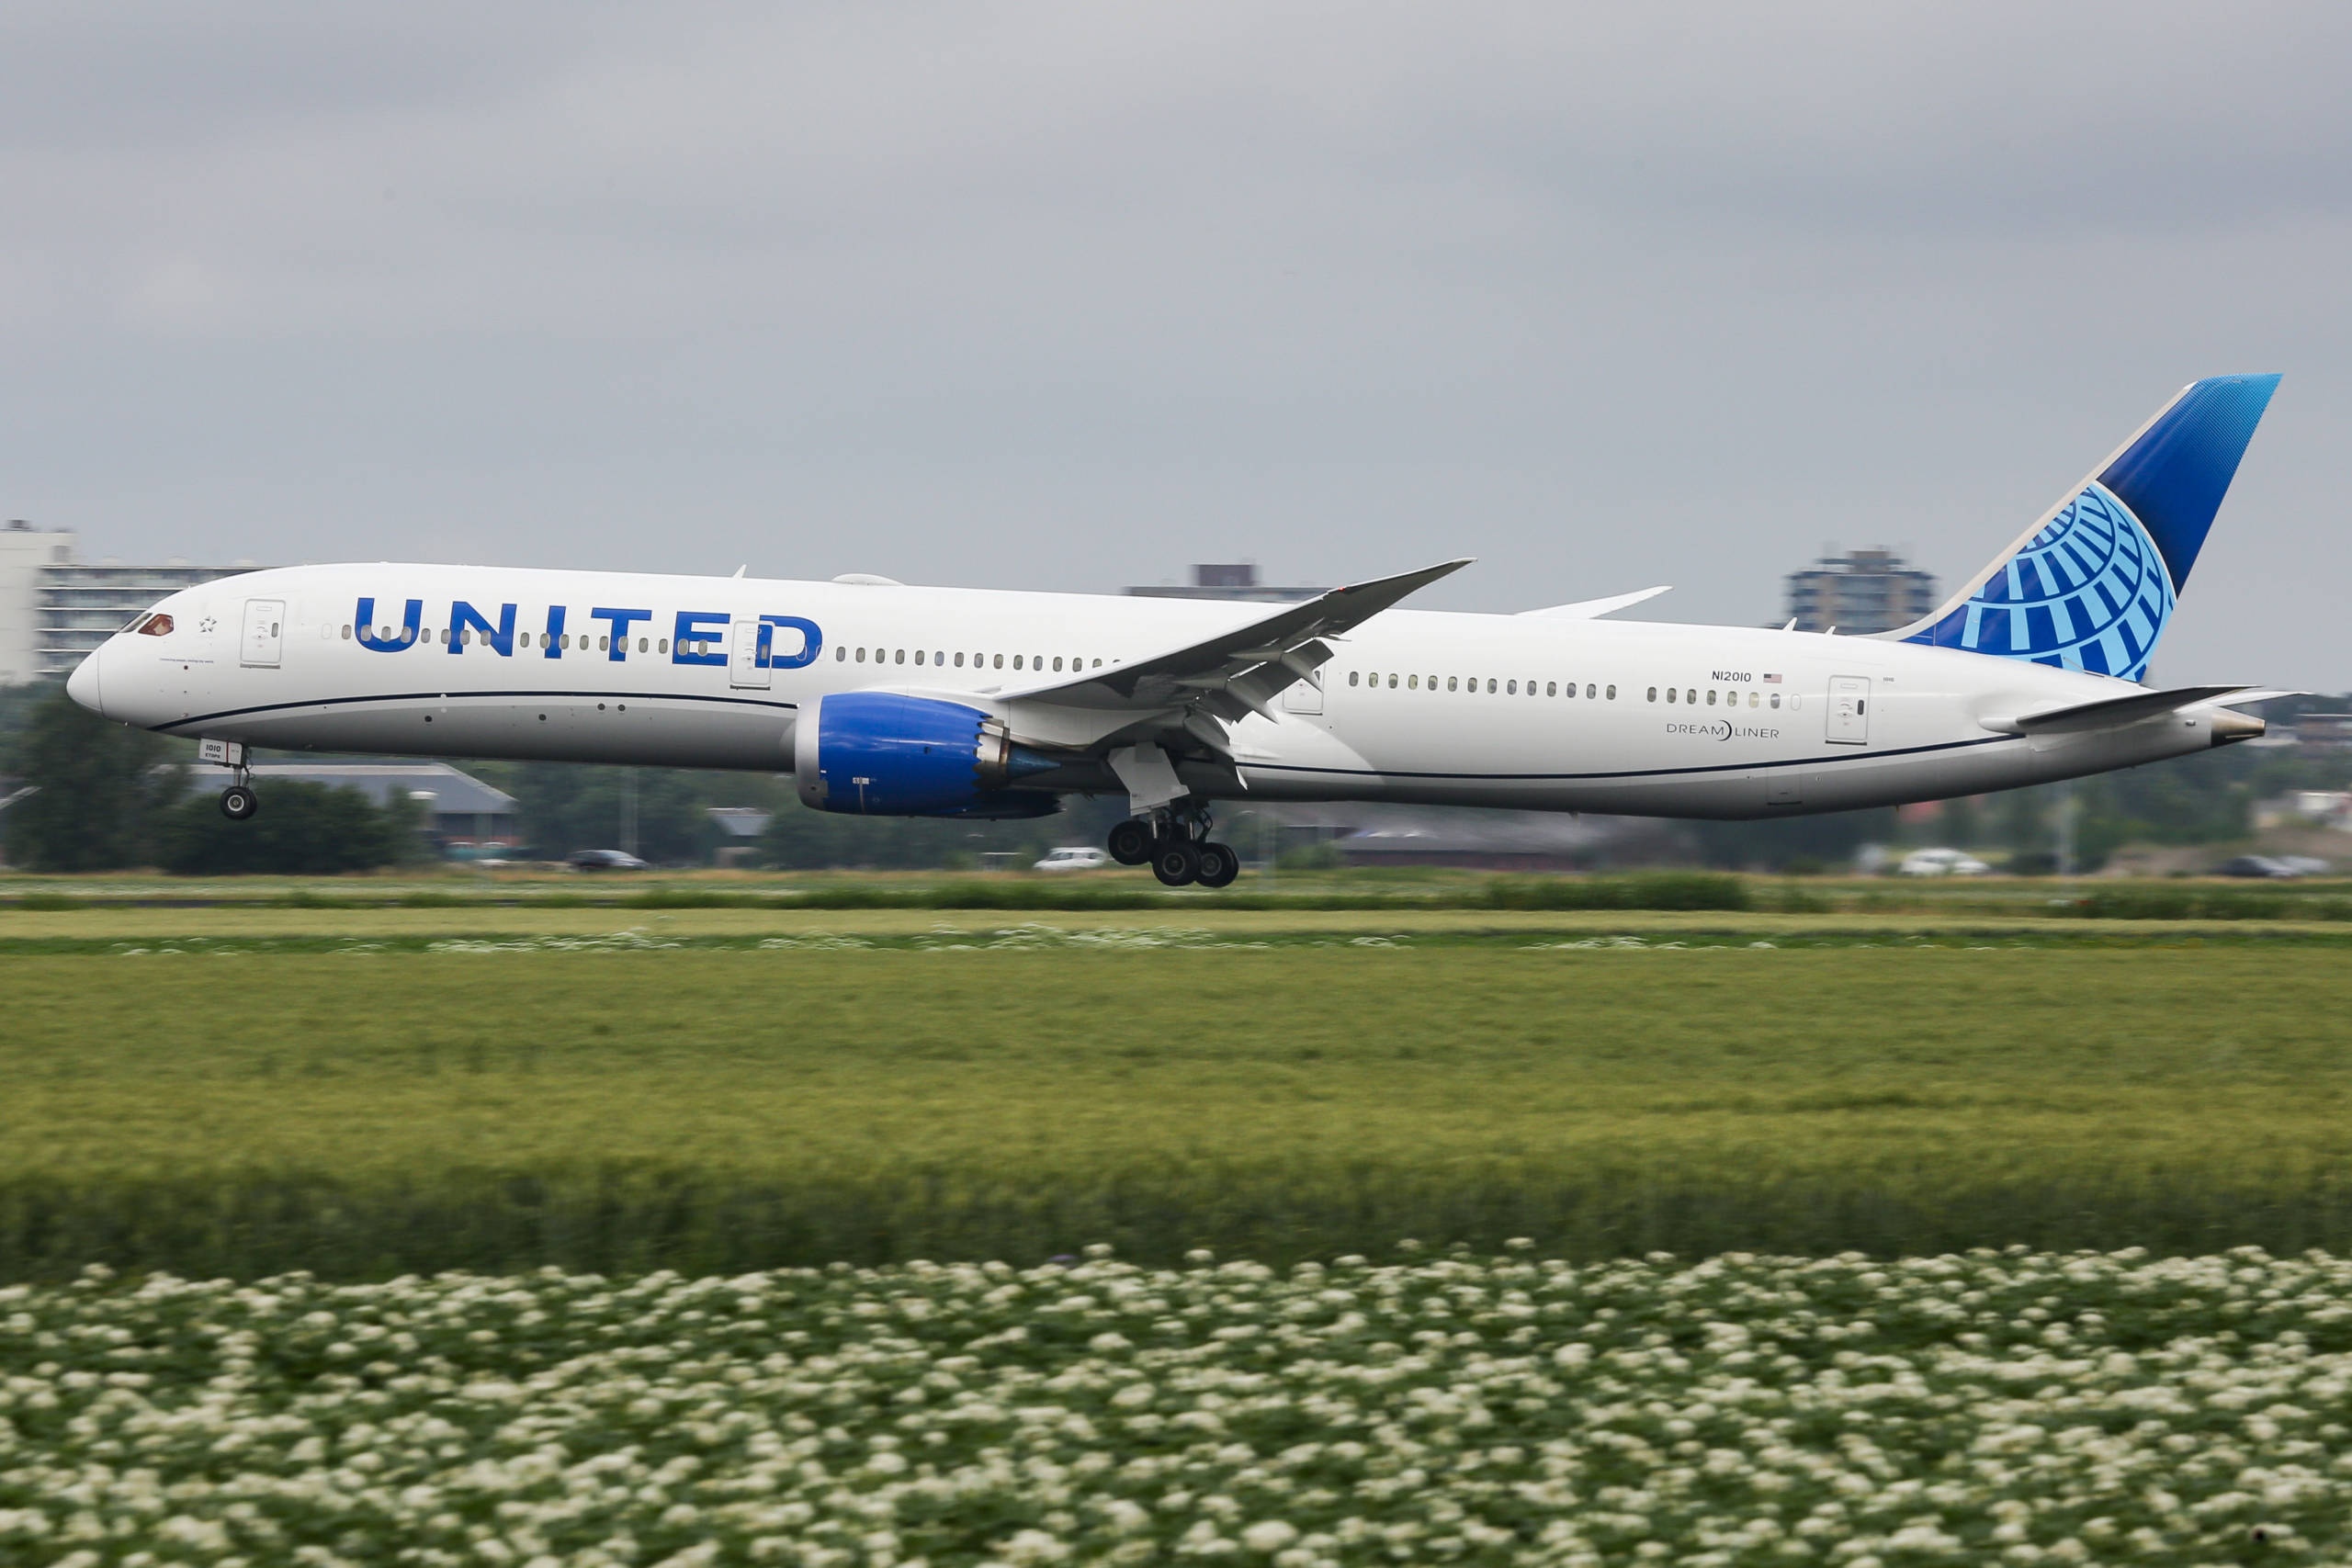 United Airlines Boeing 787-10 Dreamliner aircraft as seen on final approach landing at Amsterdam airport